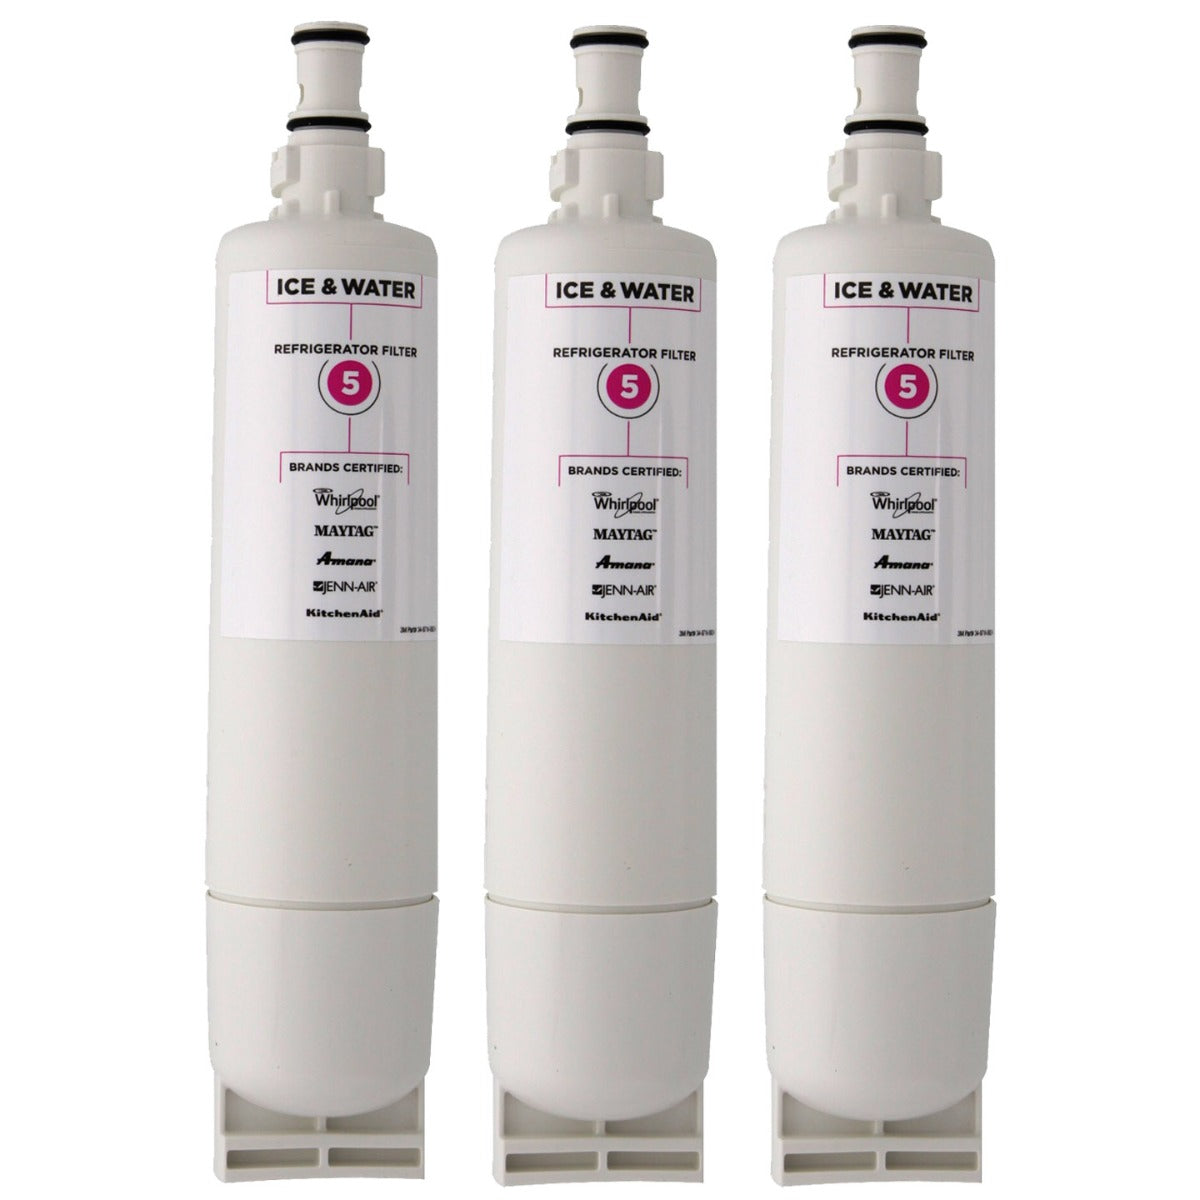 Whirlpool 4396508 and 4396510 EveryDrop EDR5RXD1 (Filter 5) Ice and Water Refrigerator Filter